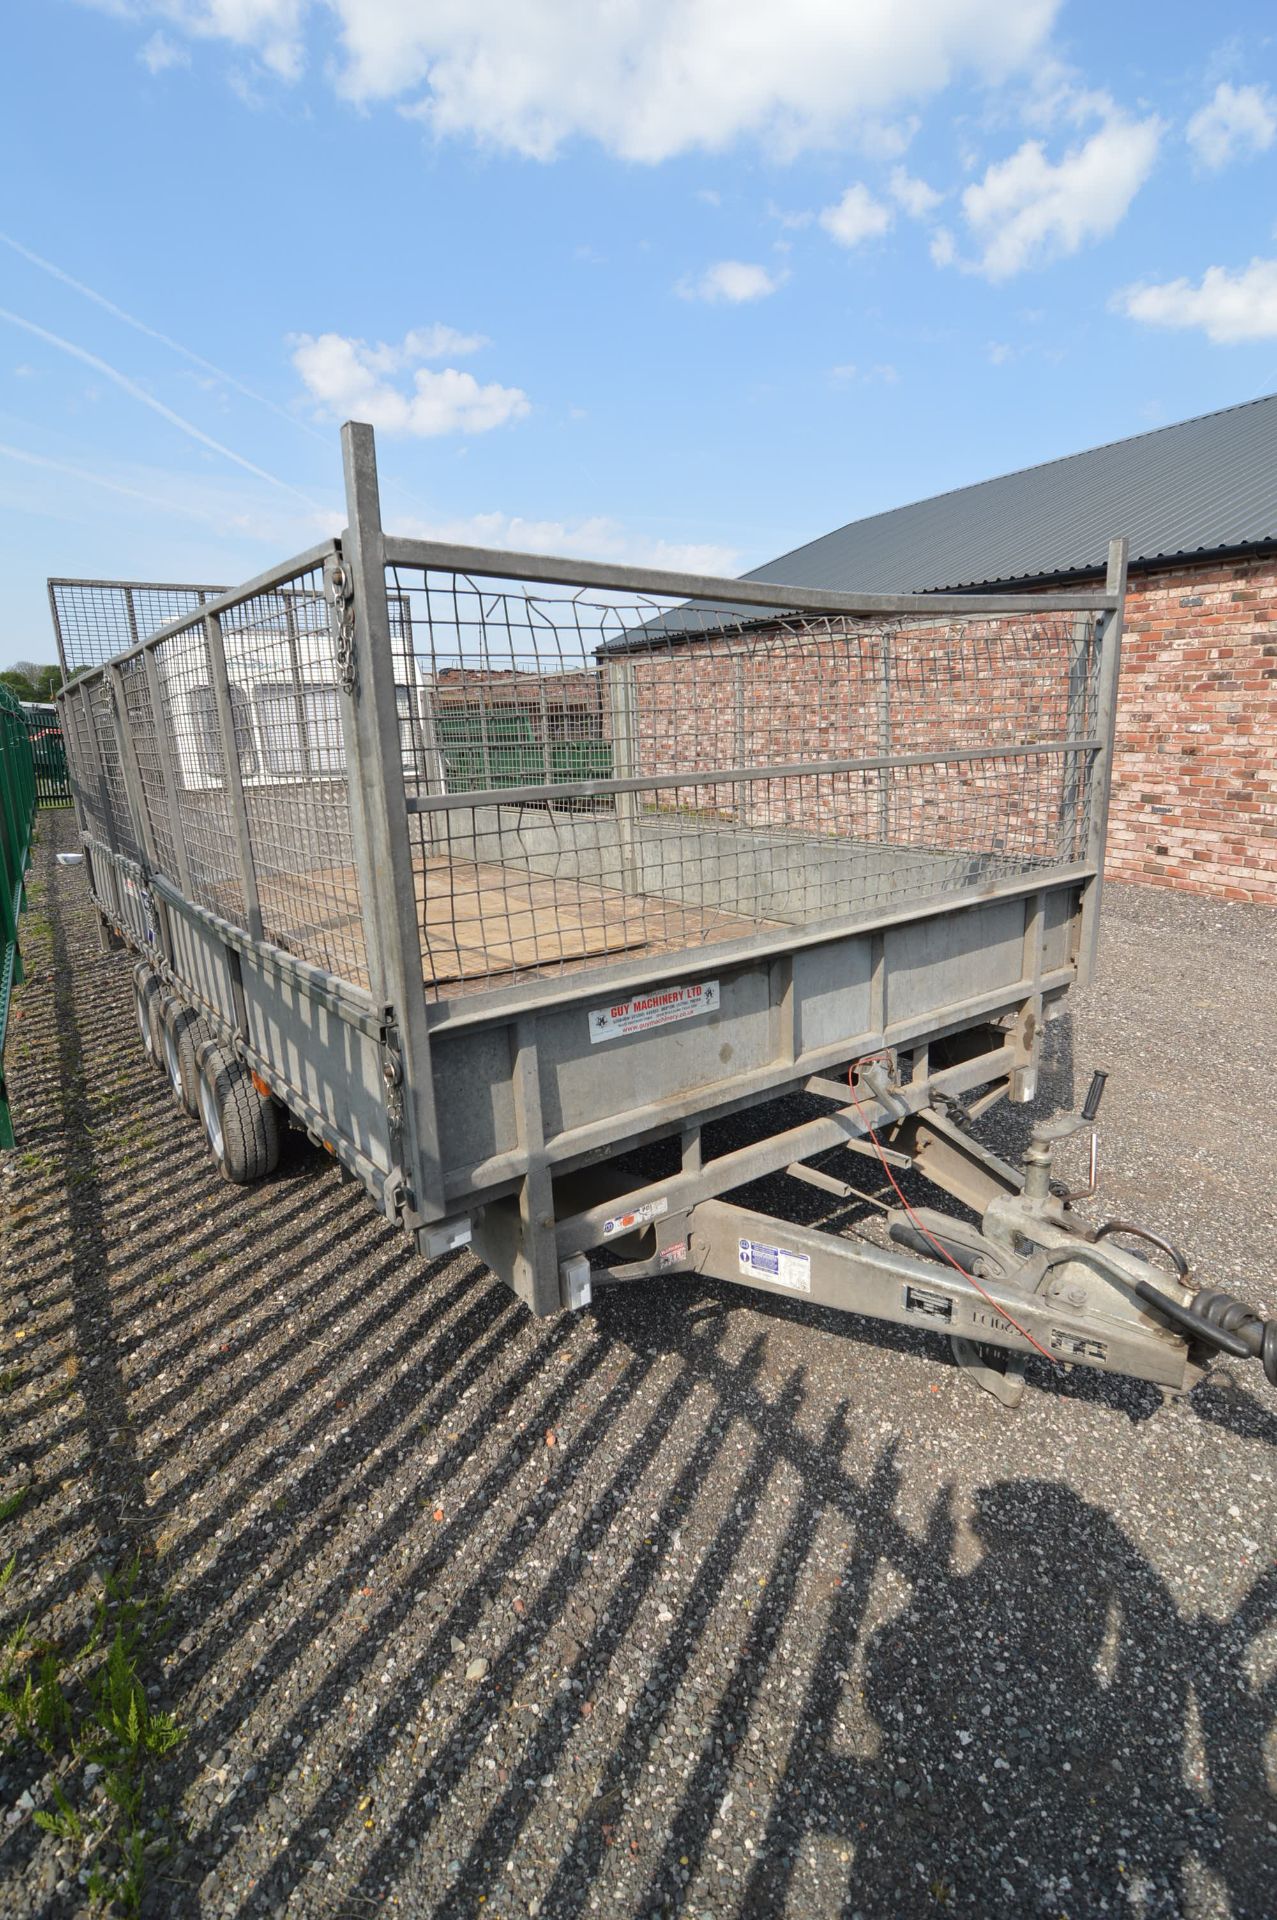 Ifor Williams 3C6LM167G3 TRI-AXLE TRAILER, serial no. SCKT0000E5103793, 3500kg gross weight, 16ft - Image 3 of 3